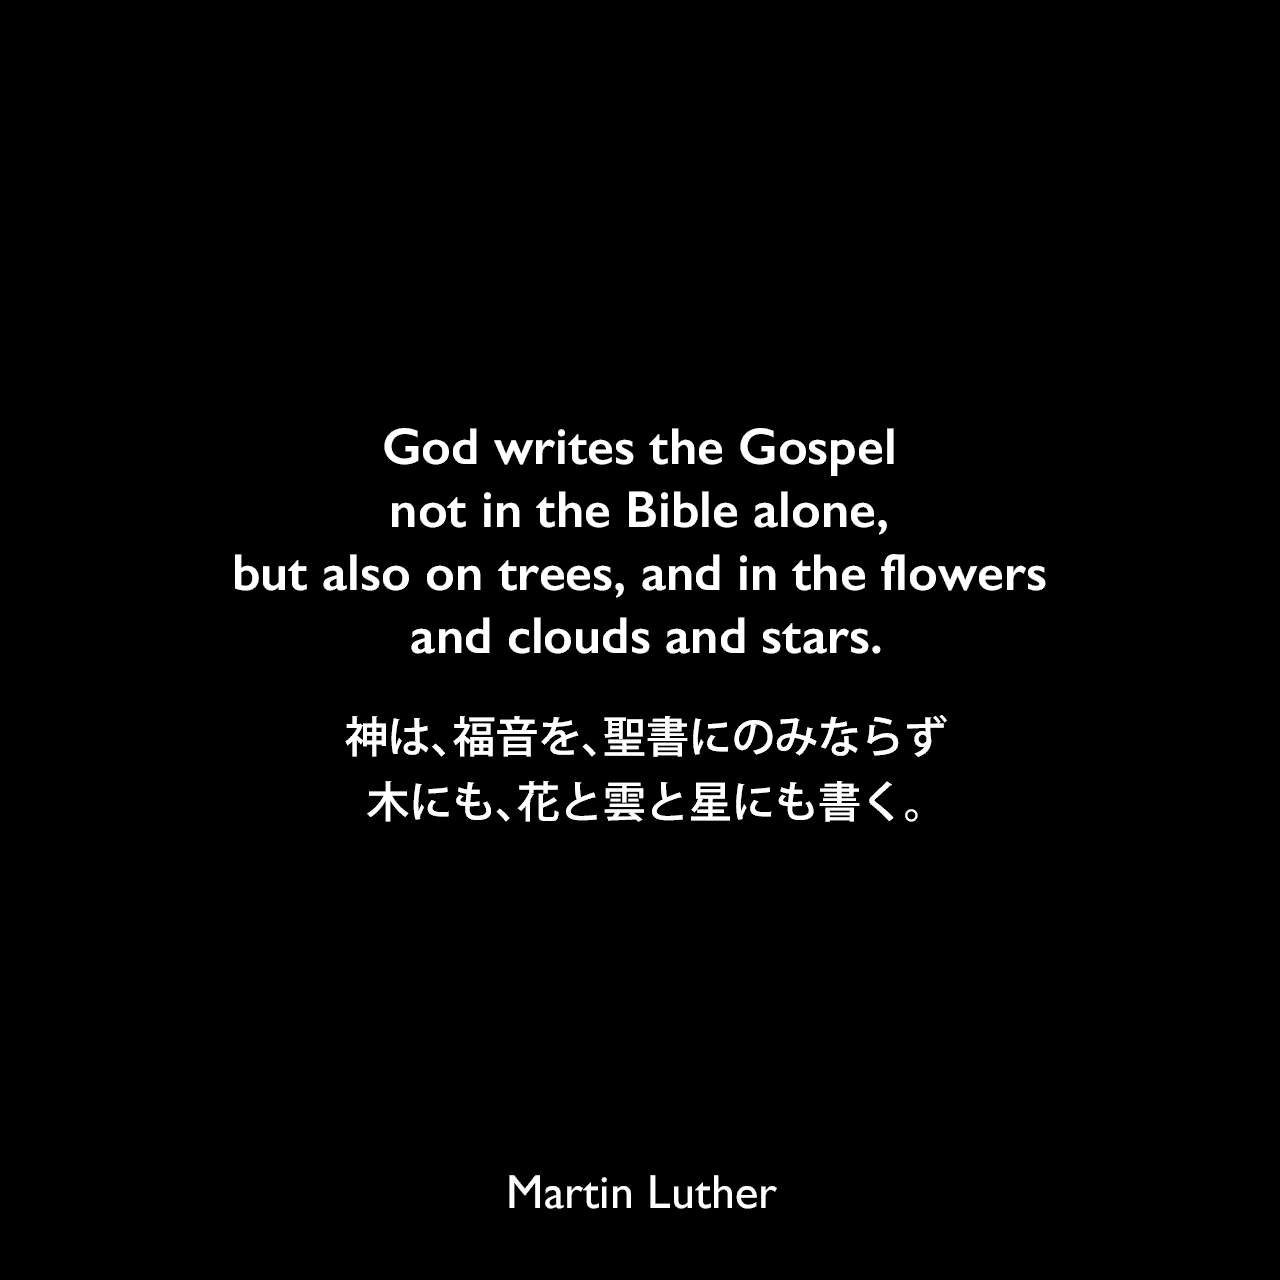 God writes the Gospel not in the Bible alone, but also on trees, and in the flowers and clouds and stars.神は、福音を、聖書にのみならず、木にも、花と雲と星にも書く。Martin Luther